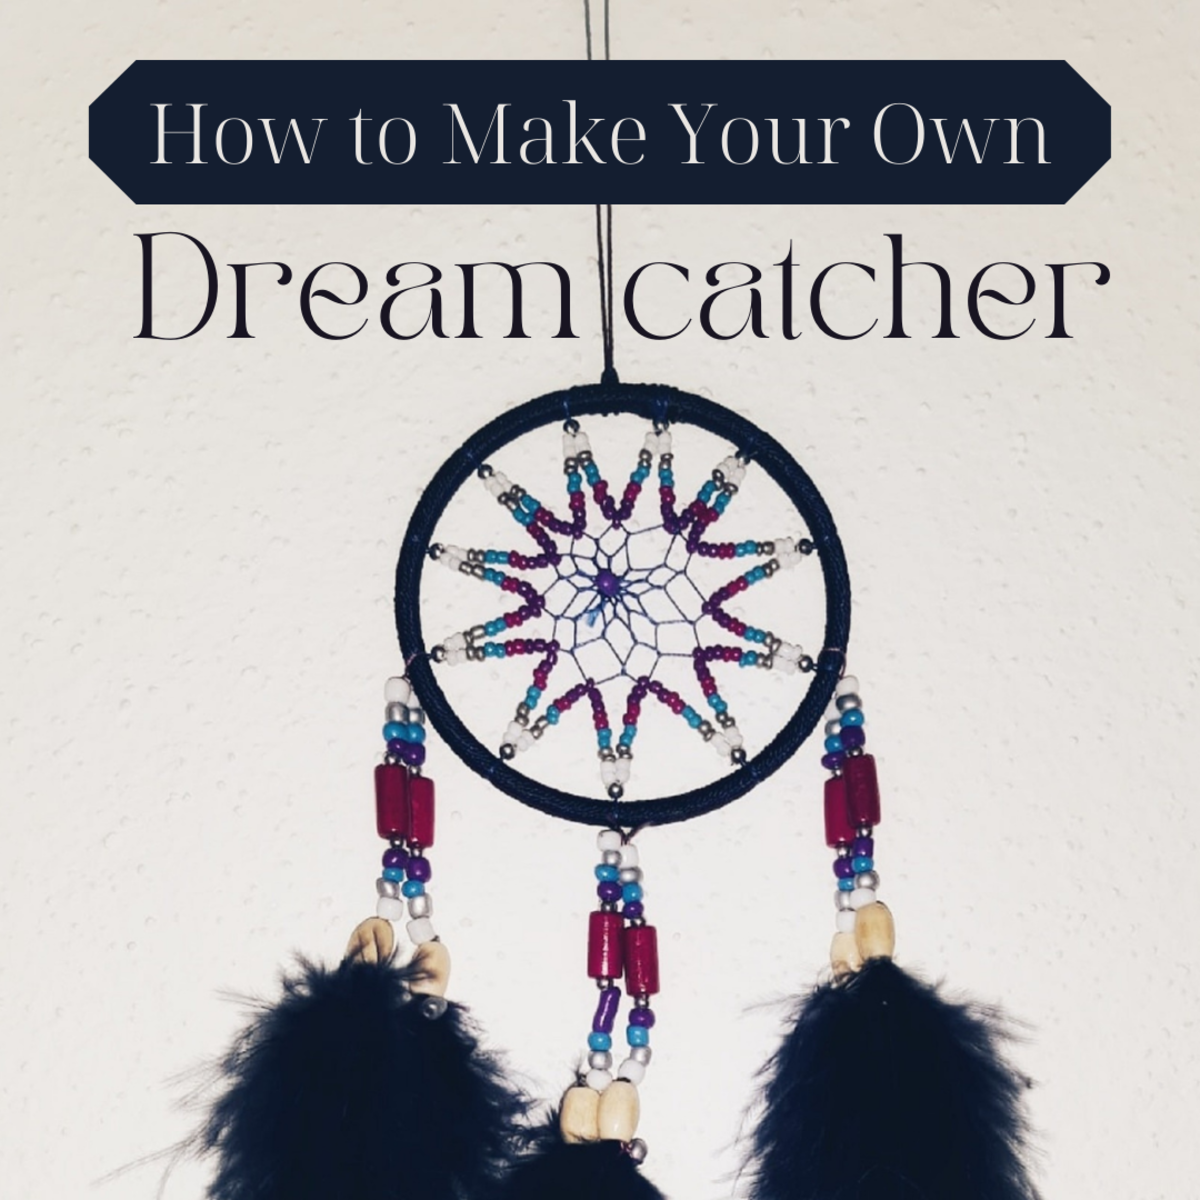 This article will show you how to make a simple dreamcatcher and provide some information on its cultural roots in Ojibwe tradition.